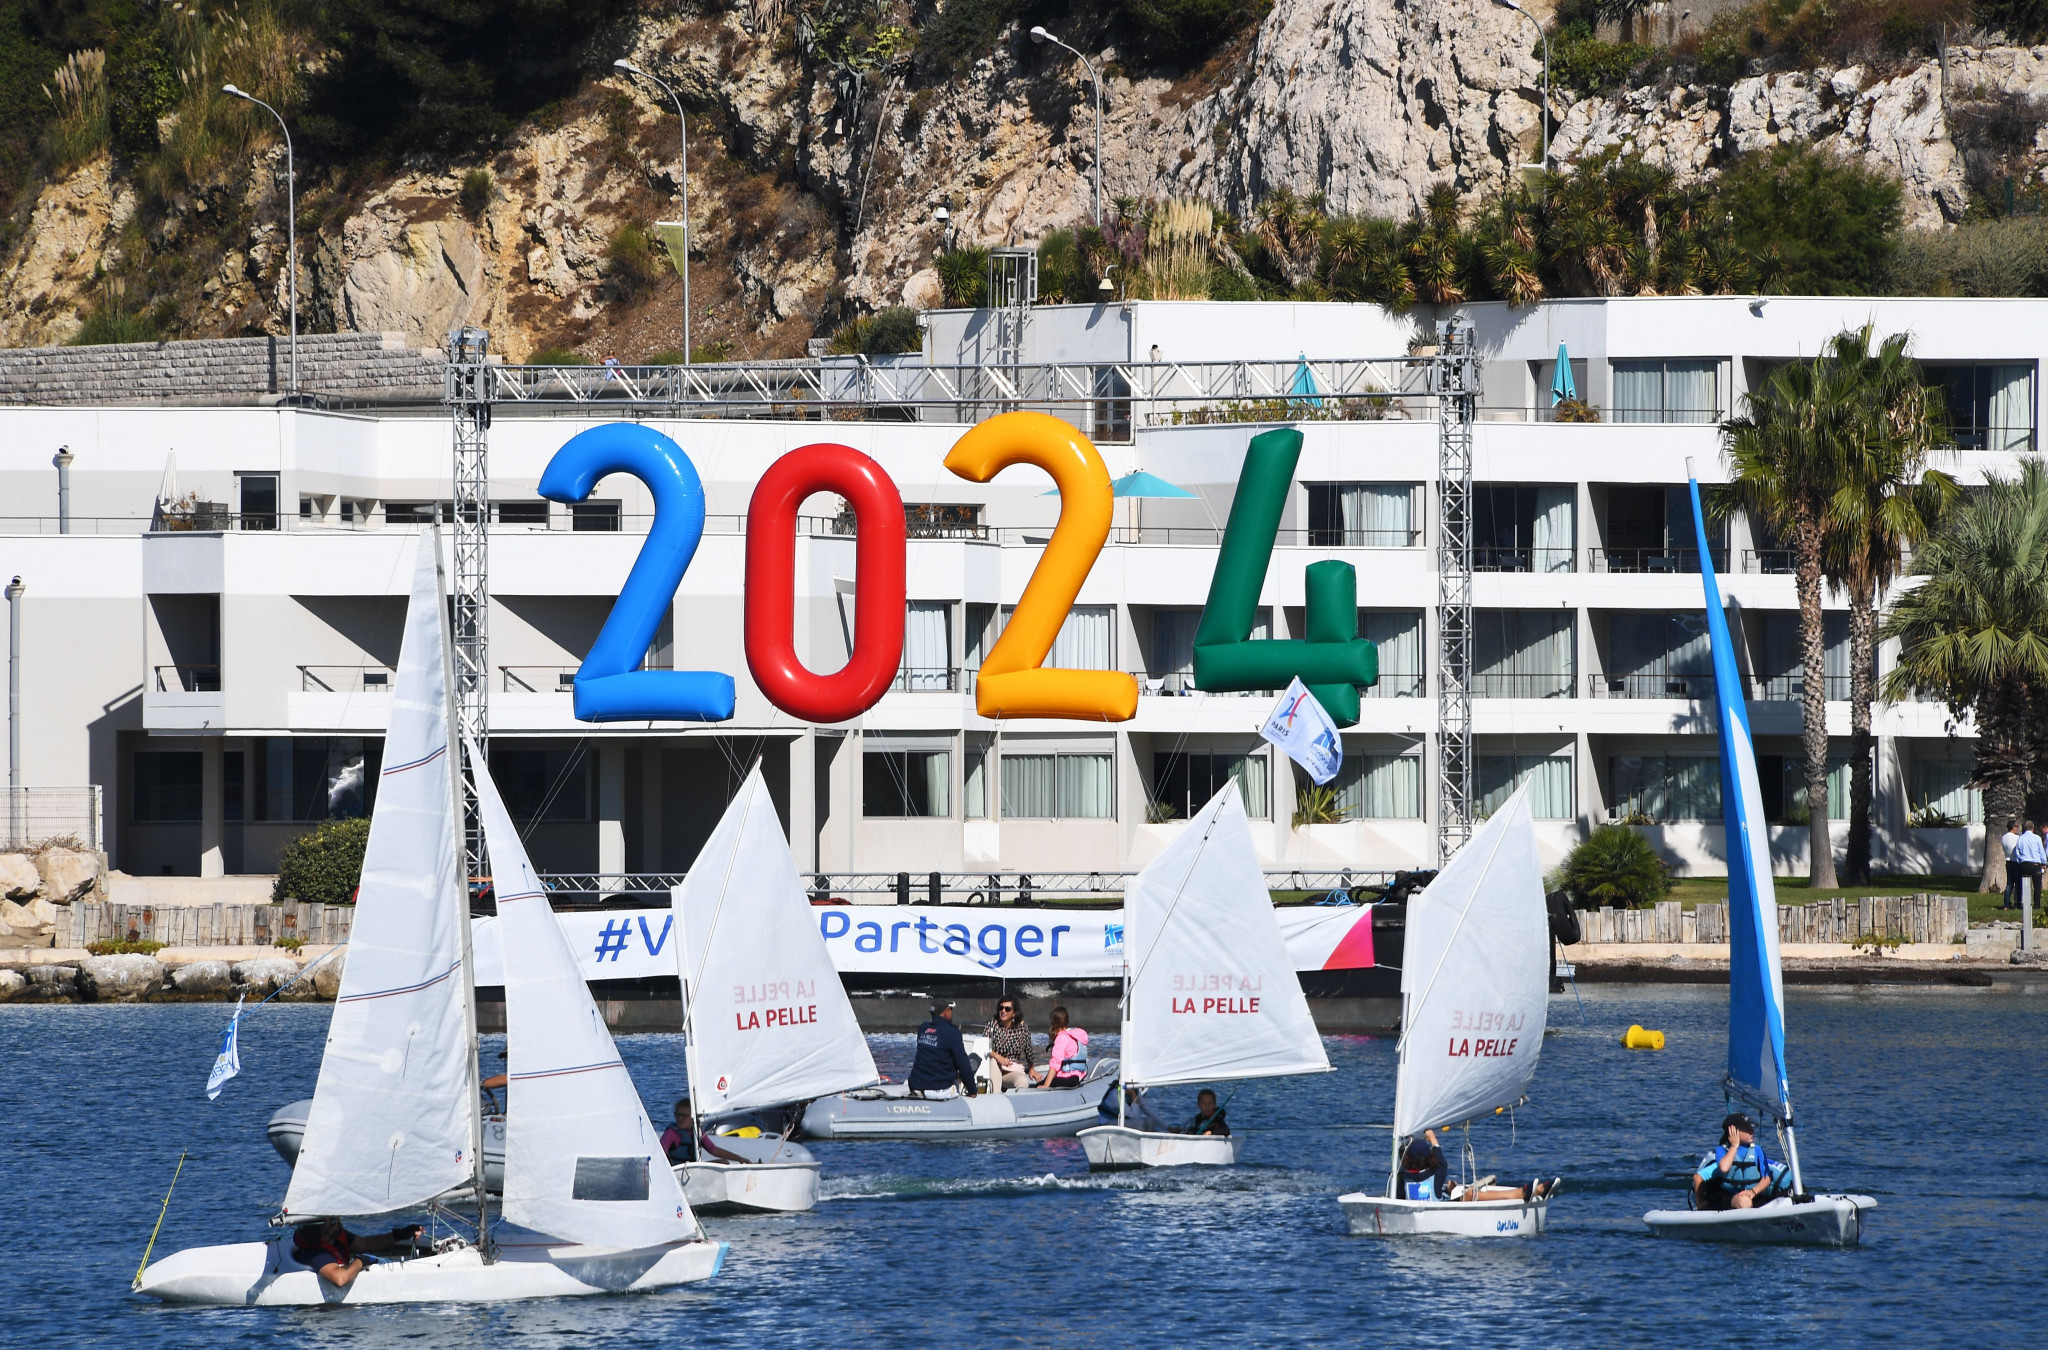 Solideo hopeful funding for work on Paris 2024 sailing venue will be approved next month